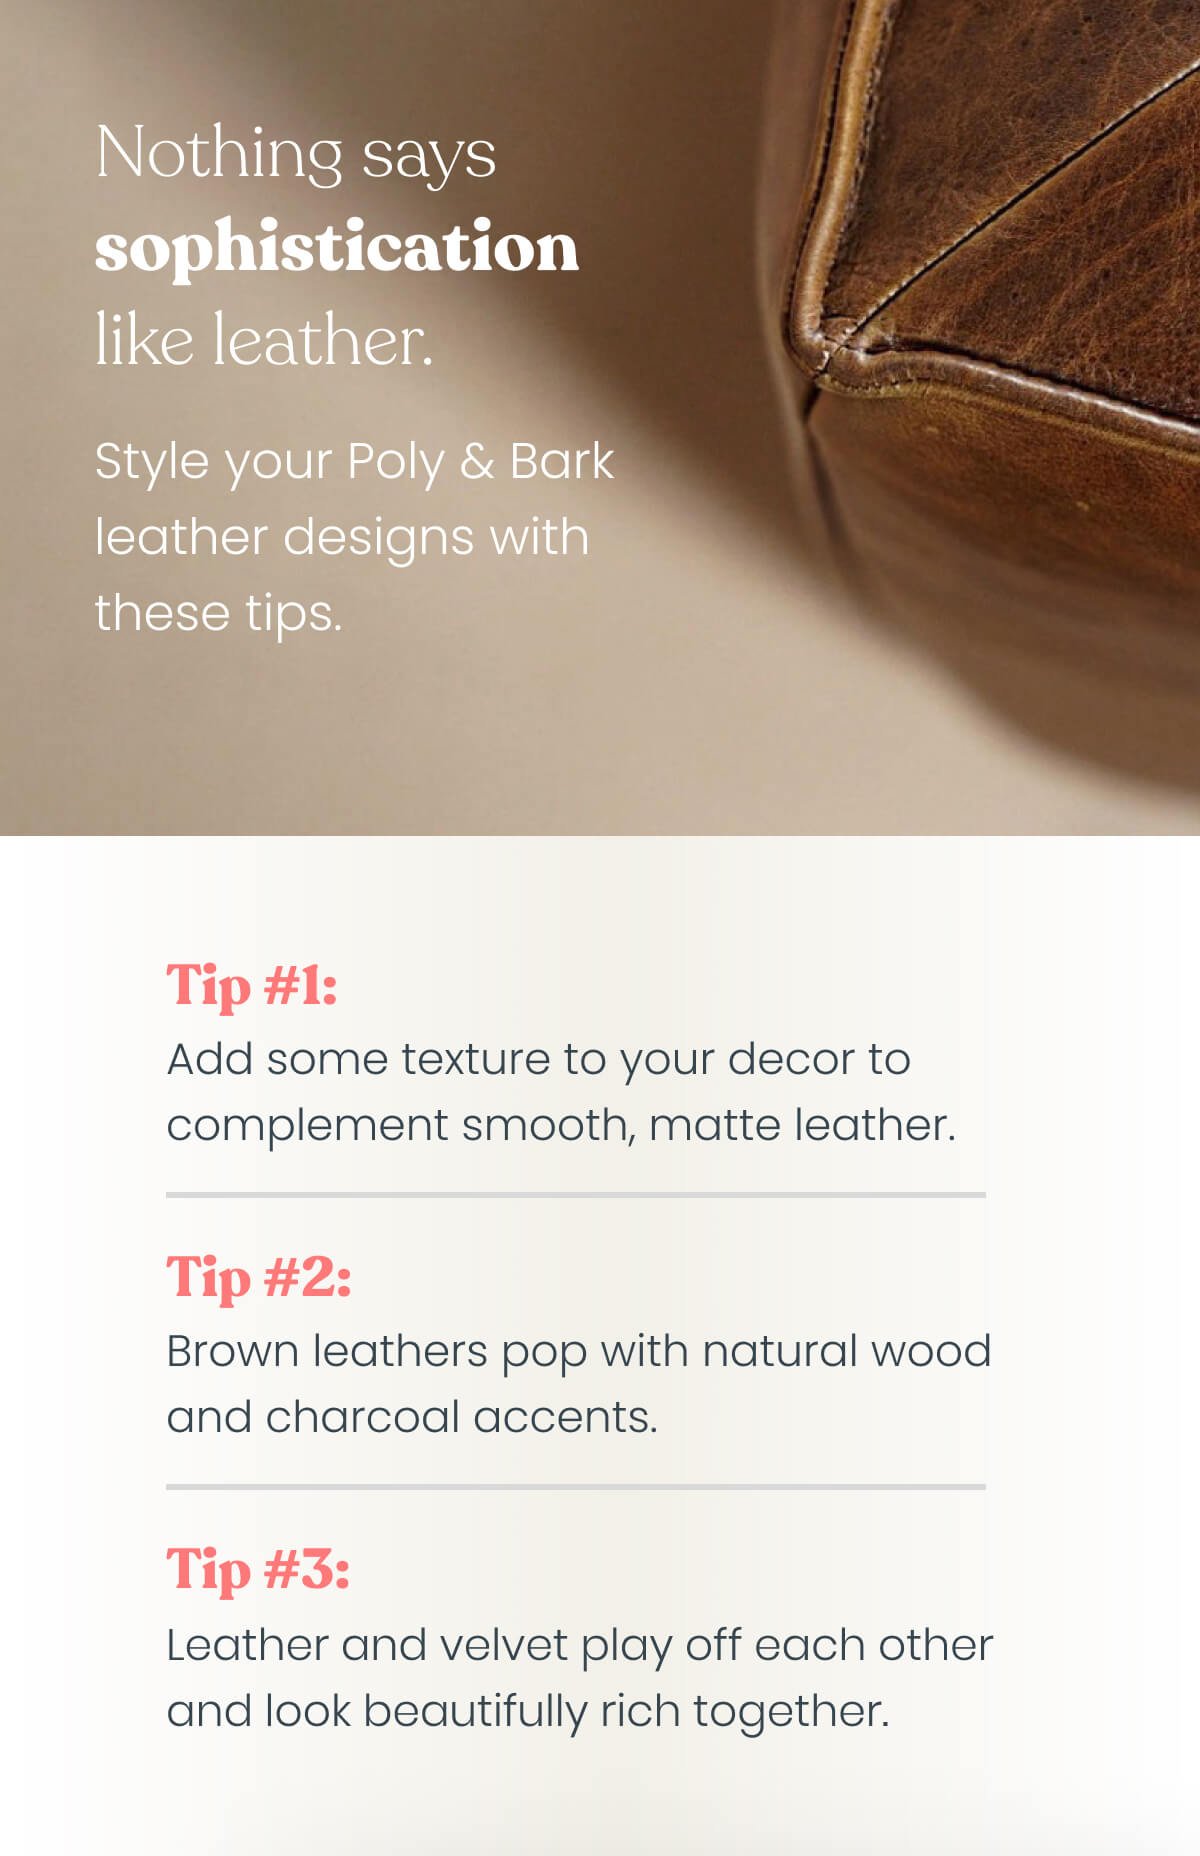 Nothing says sophistication like leather. Style your Poly & Bark leather designs with these tips. Tip #1: Pair dark leather pieces with colorful walls to uplift darker shade. Tip #2: Use texture and shine in your decor to complement smooth, matte leather. Tip #3: Caramel leather pops with natural wood and charcoal accents. Tip #4: Leather and velvet play off each other and look beautifully rich together.